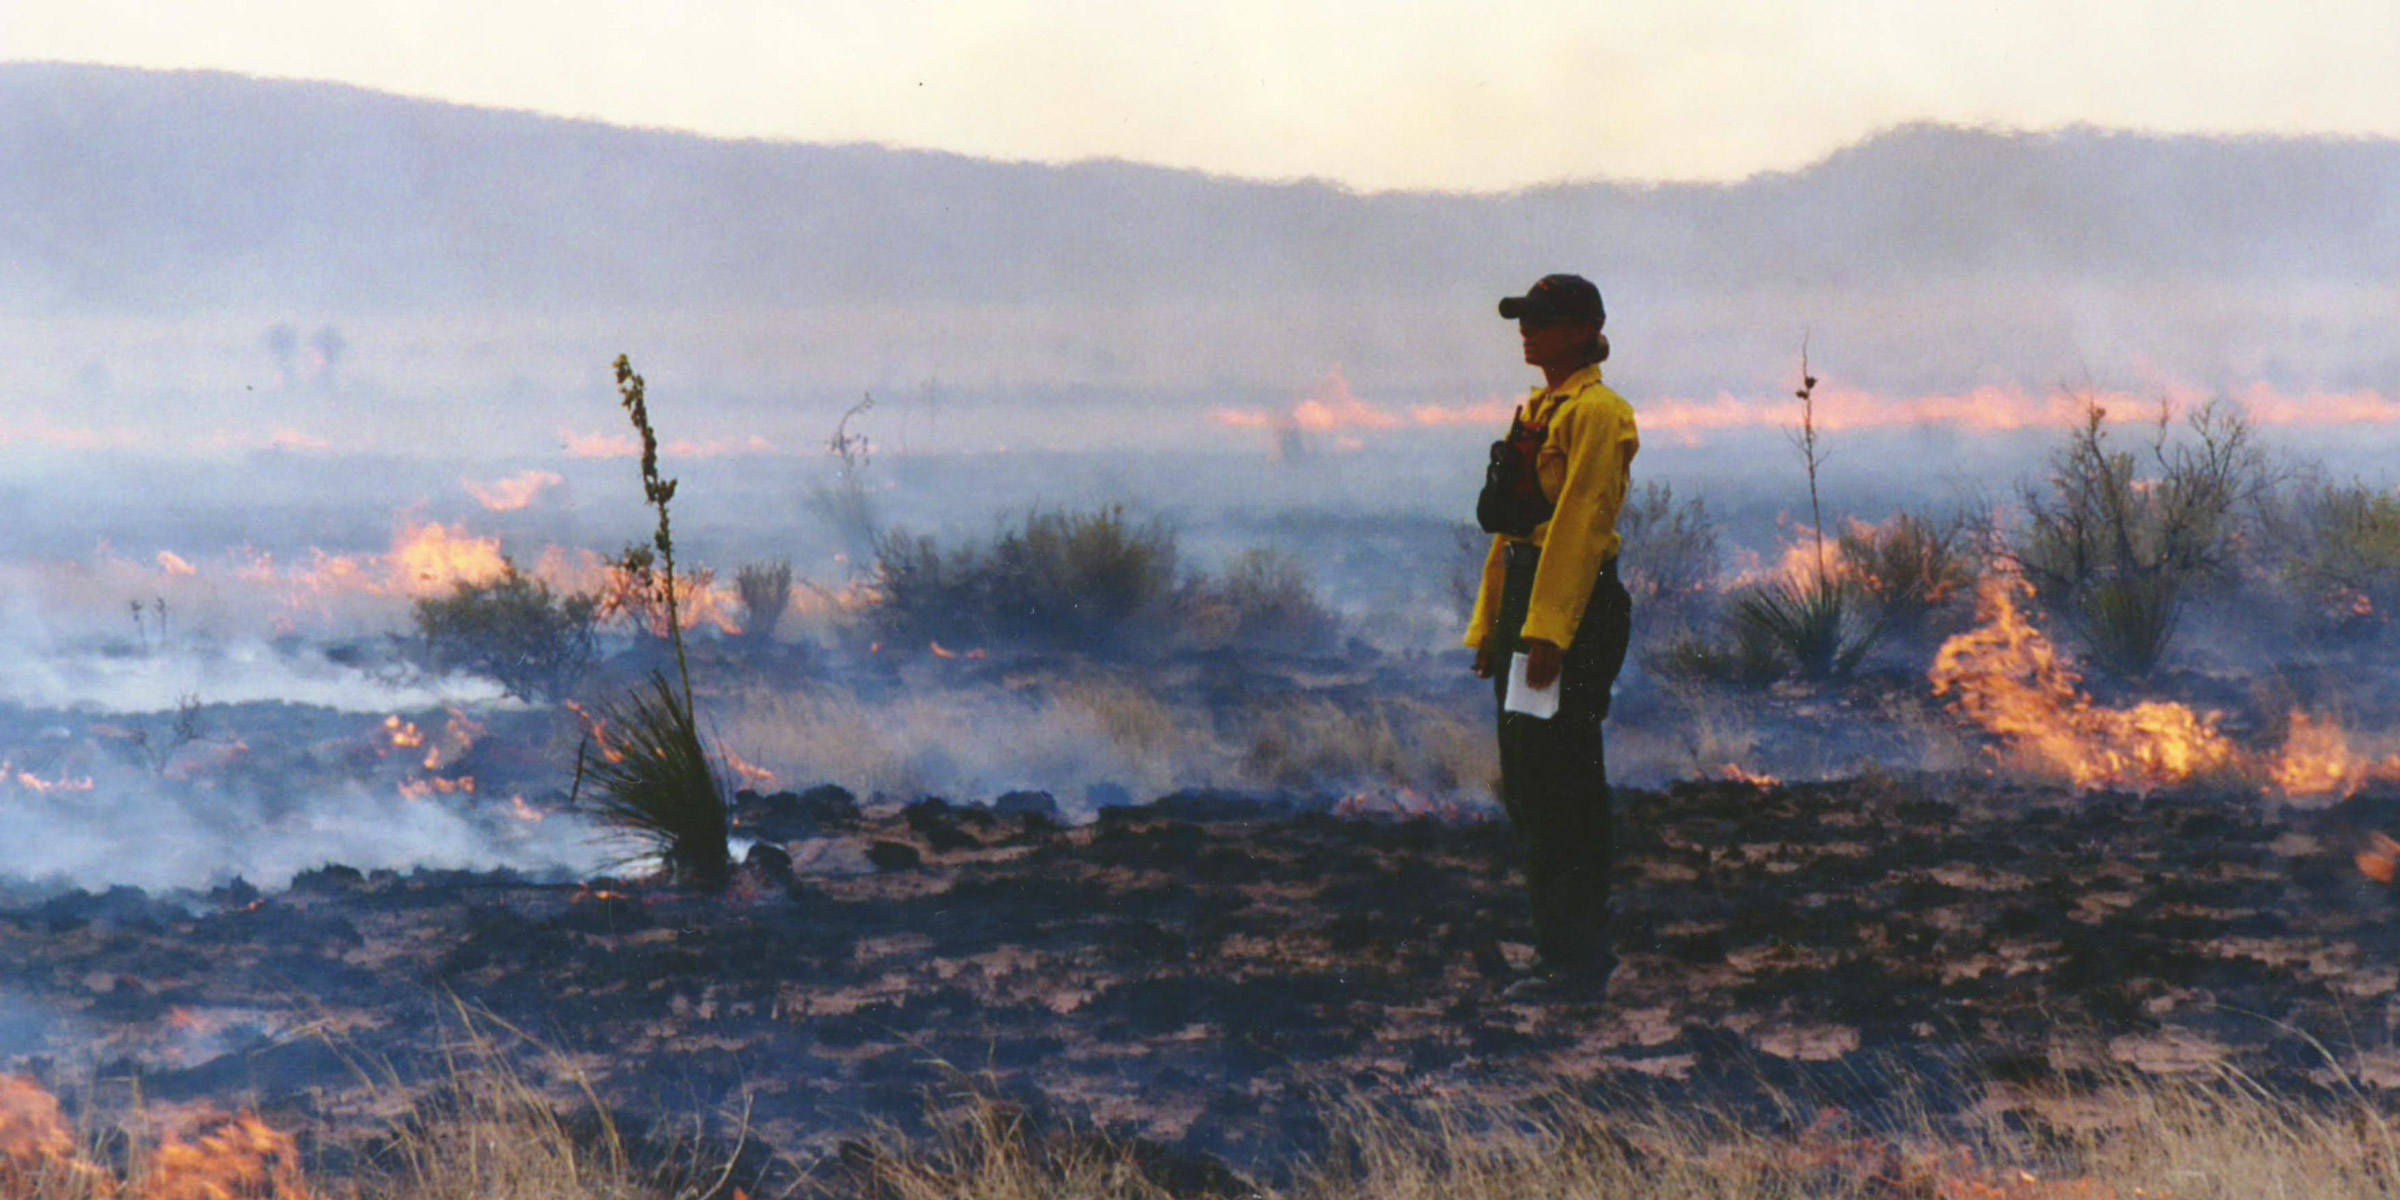 A fire monitor watches a controlled burn, as grasses and yuccas stand in flames behind her.